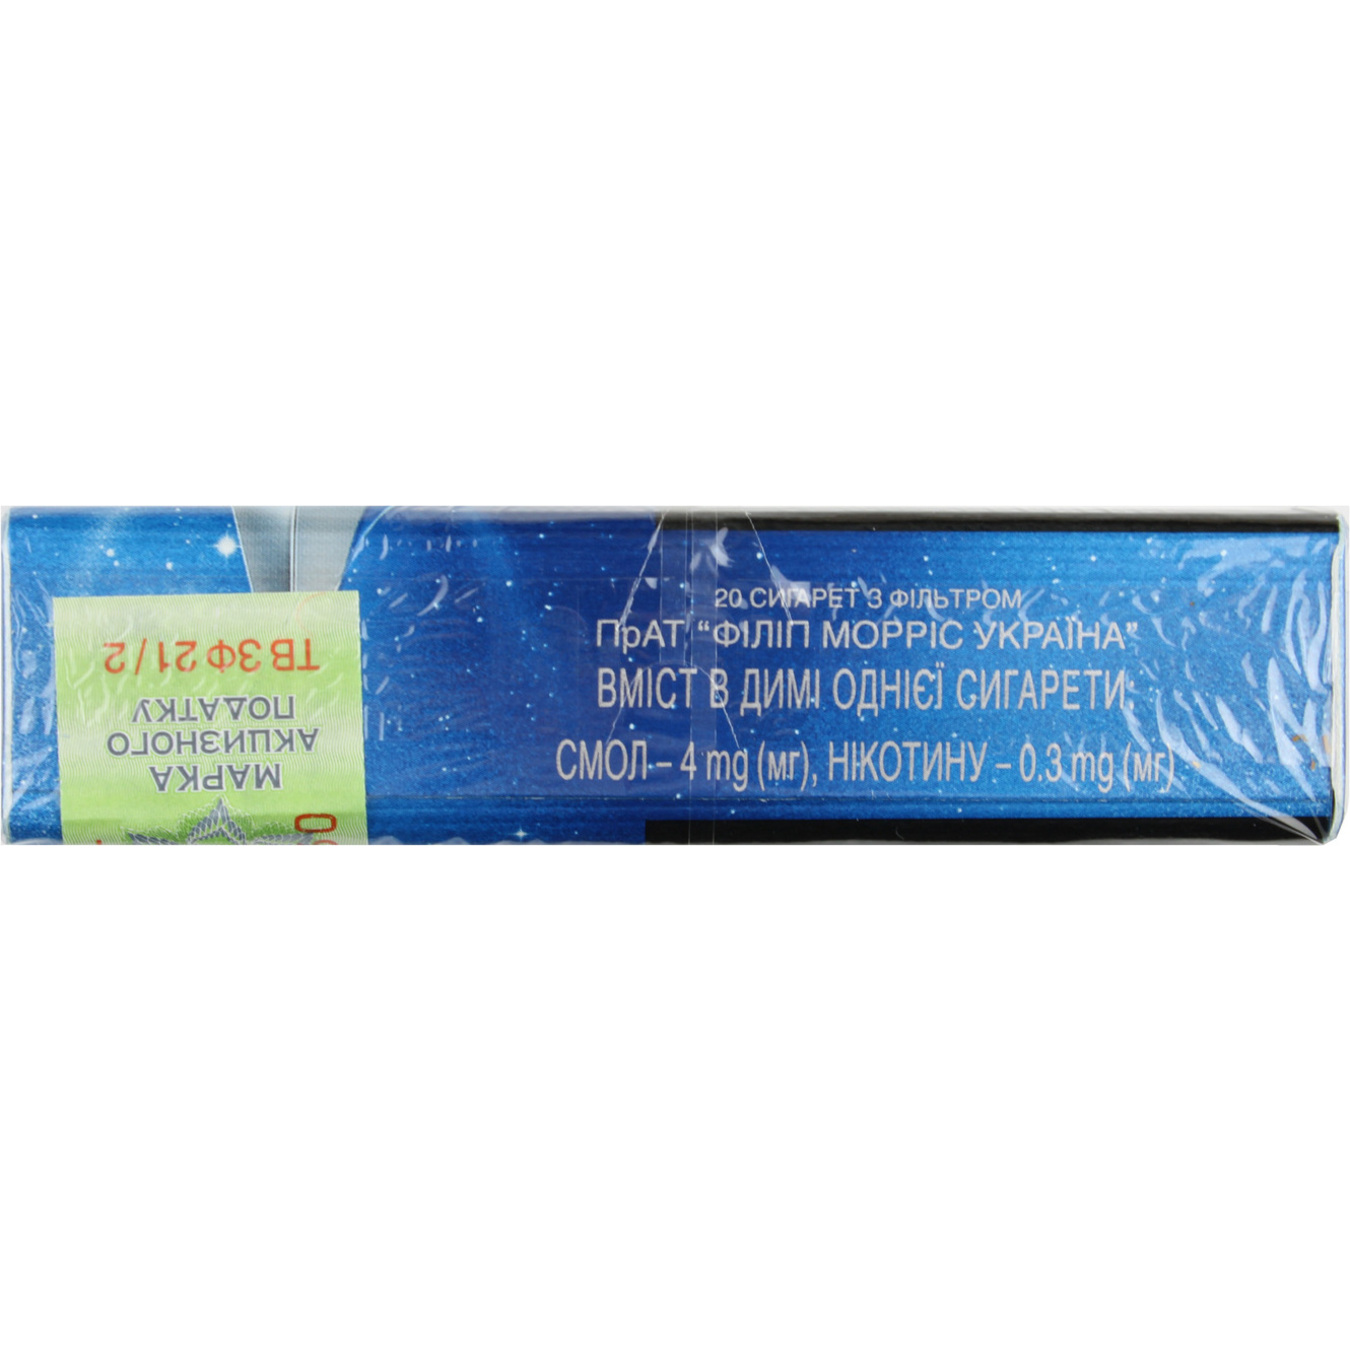 Parliament Silver Blue Cigarettes 20 pcs (the price is indicated without excise tax) 2